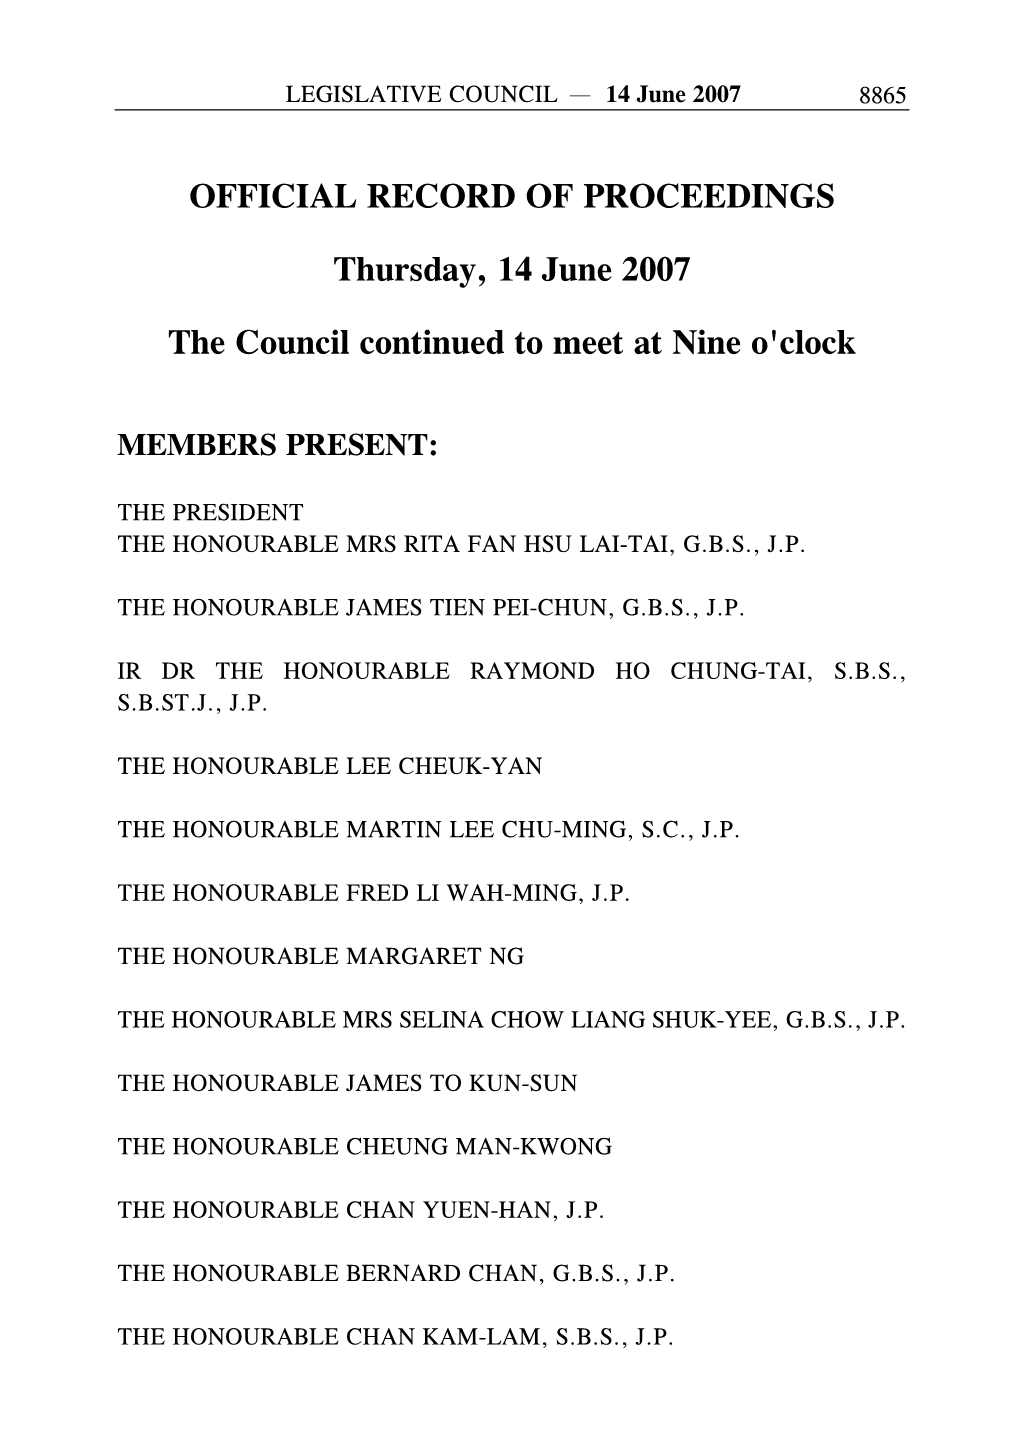 OFFICIAL RECORD of PROCEEDINGS Thursday, 14 June